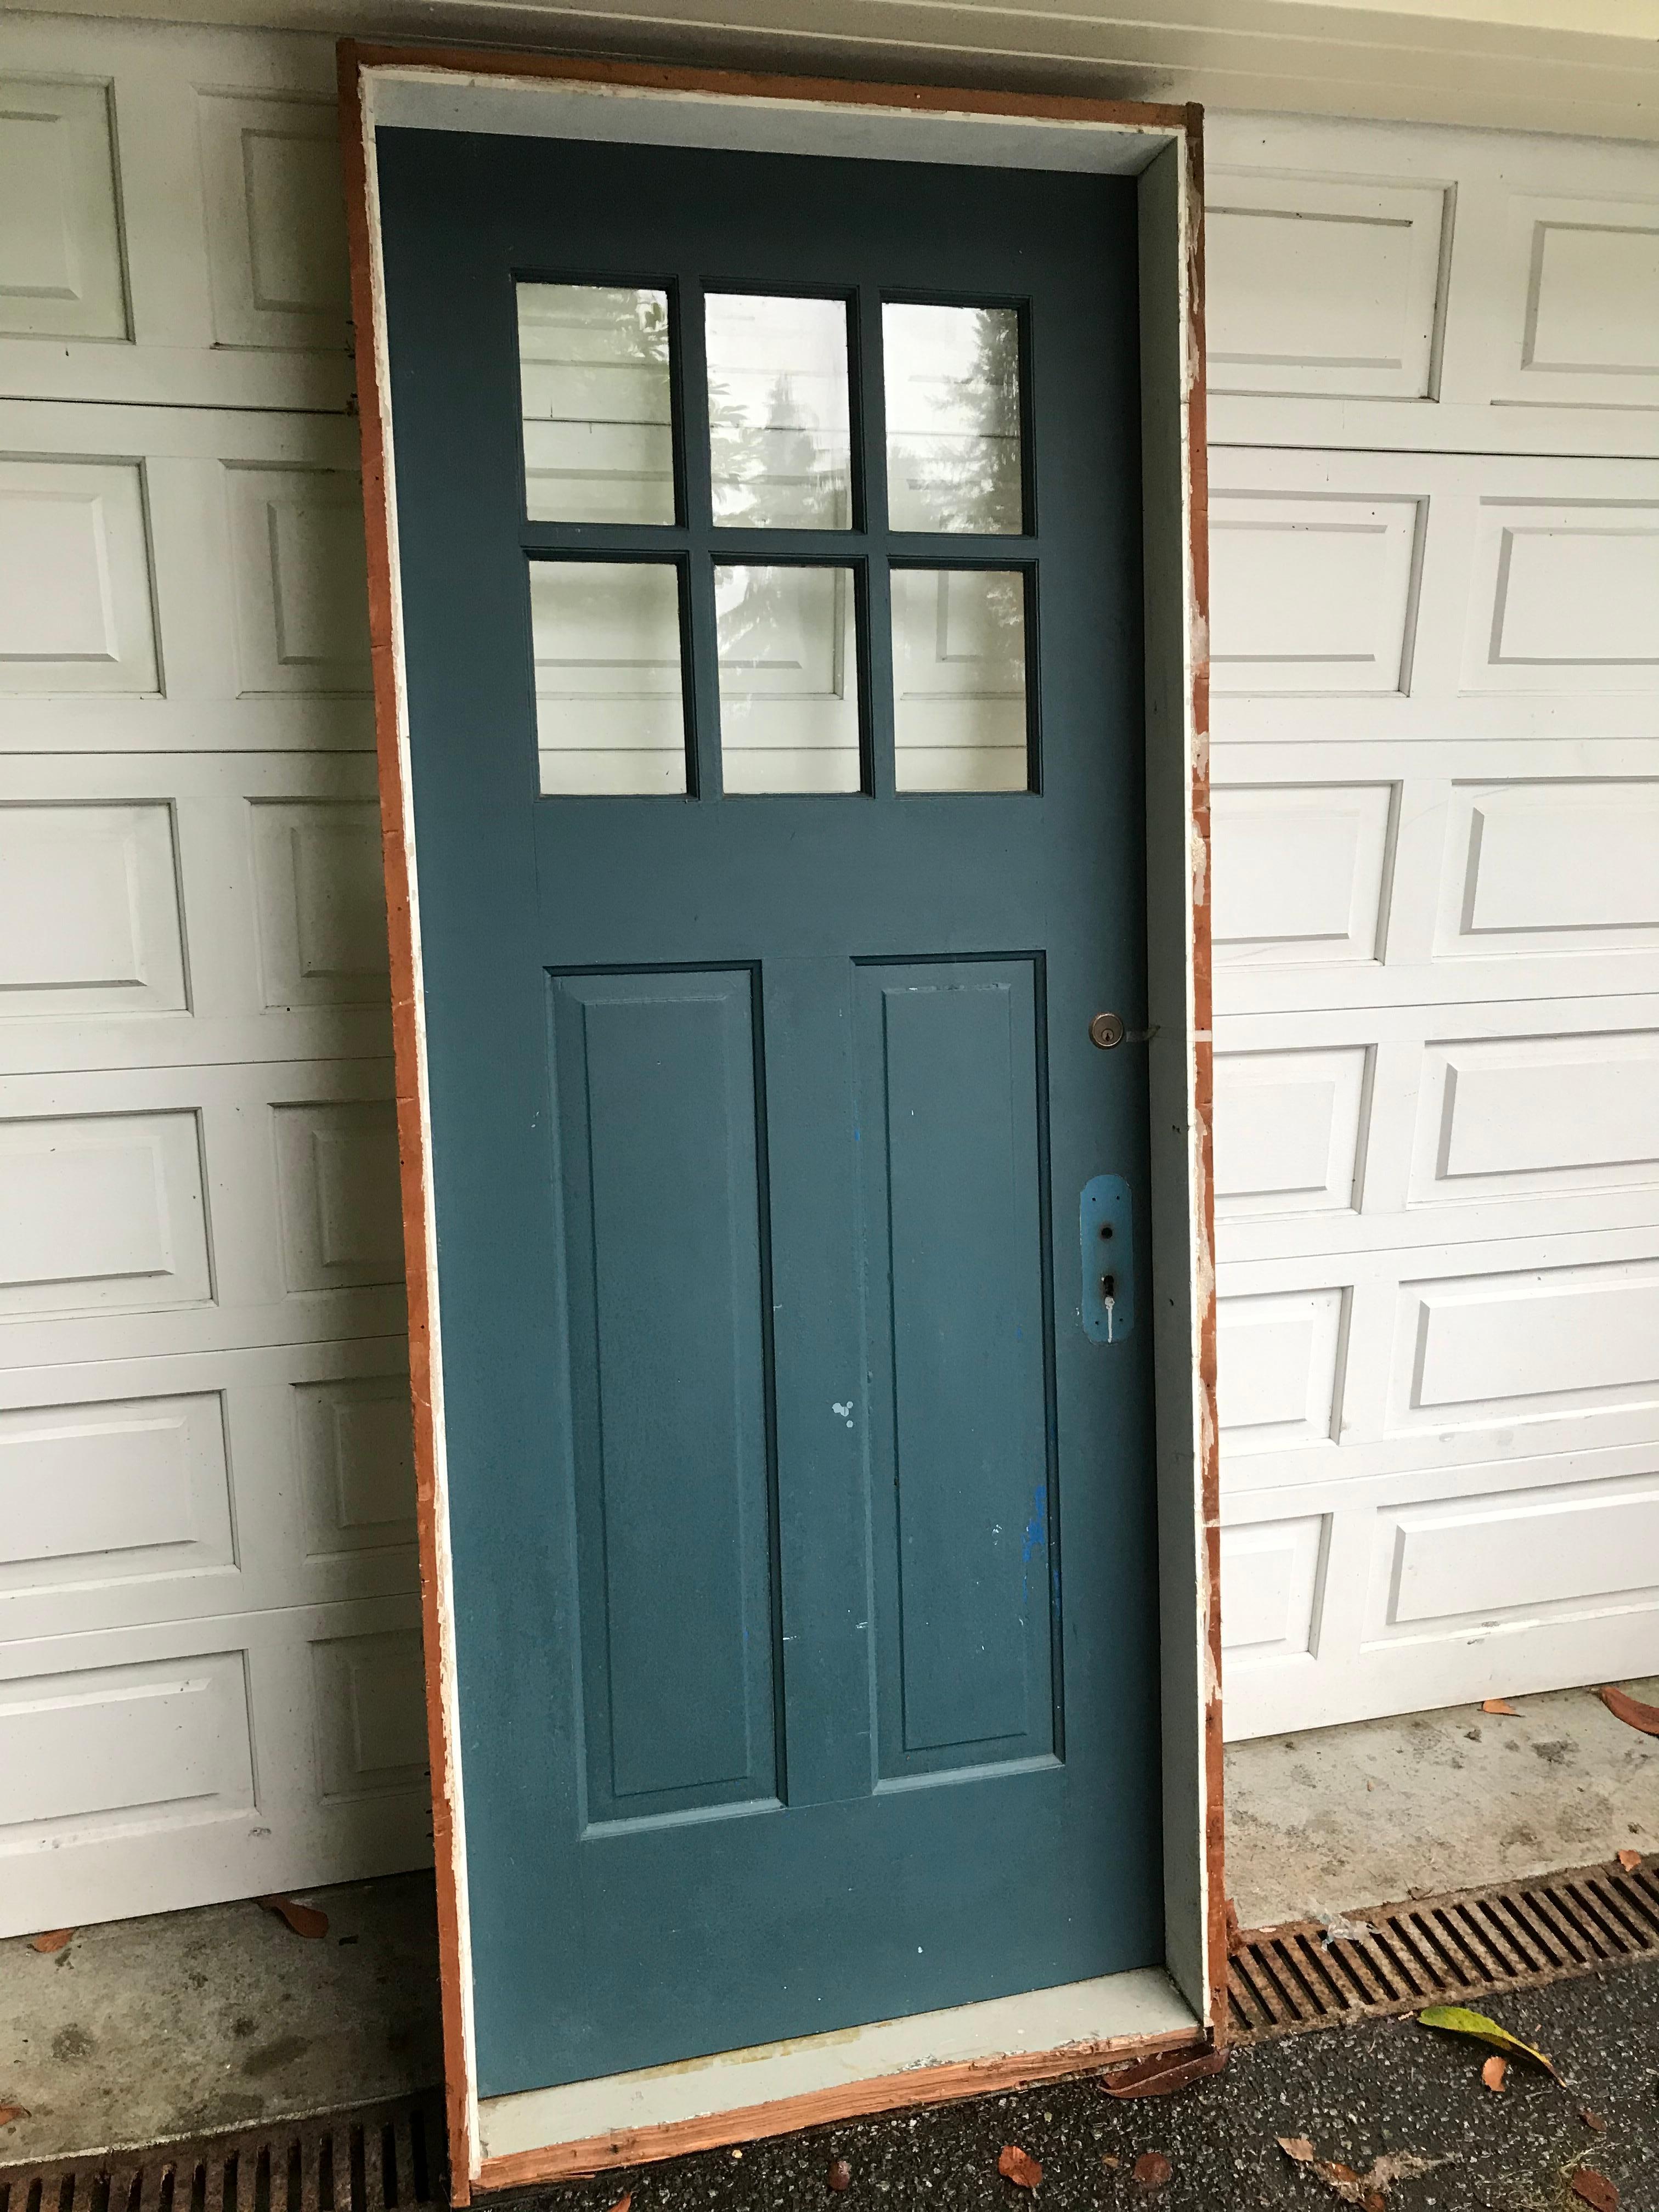 Beautiful Arts & Crafts handmade door with window in frame. This came out of a local estate from an old Craftsman bungalow. The hardware may have been replaced in the 1930s but is old. The door has no wood rot and in is healthy condition and would